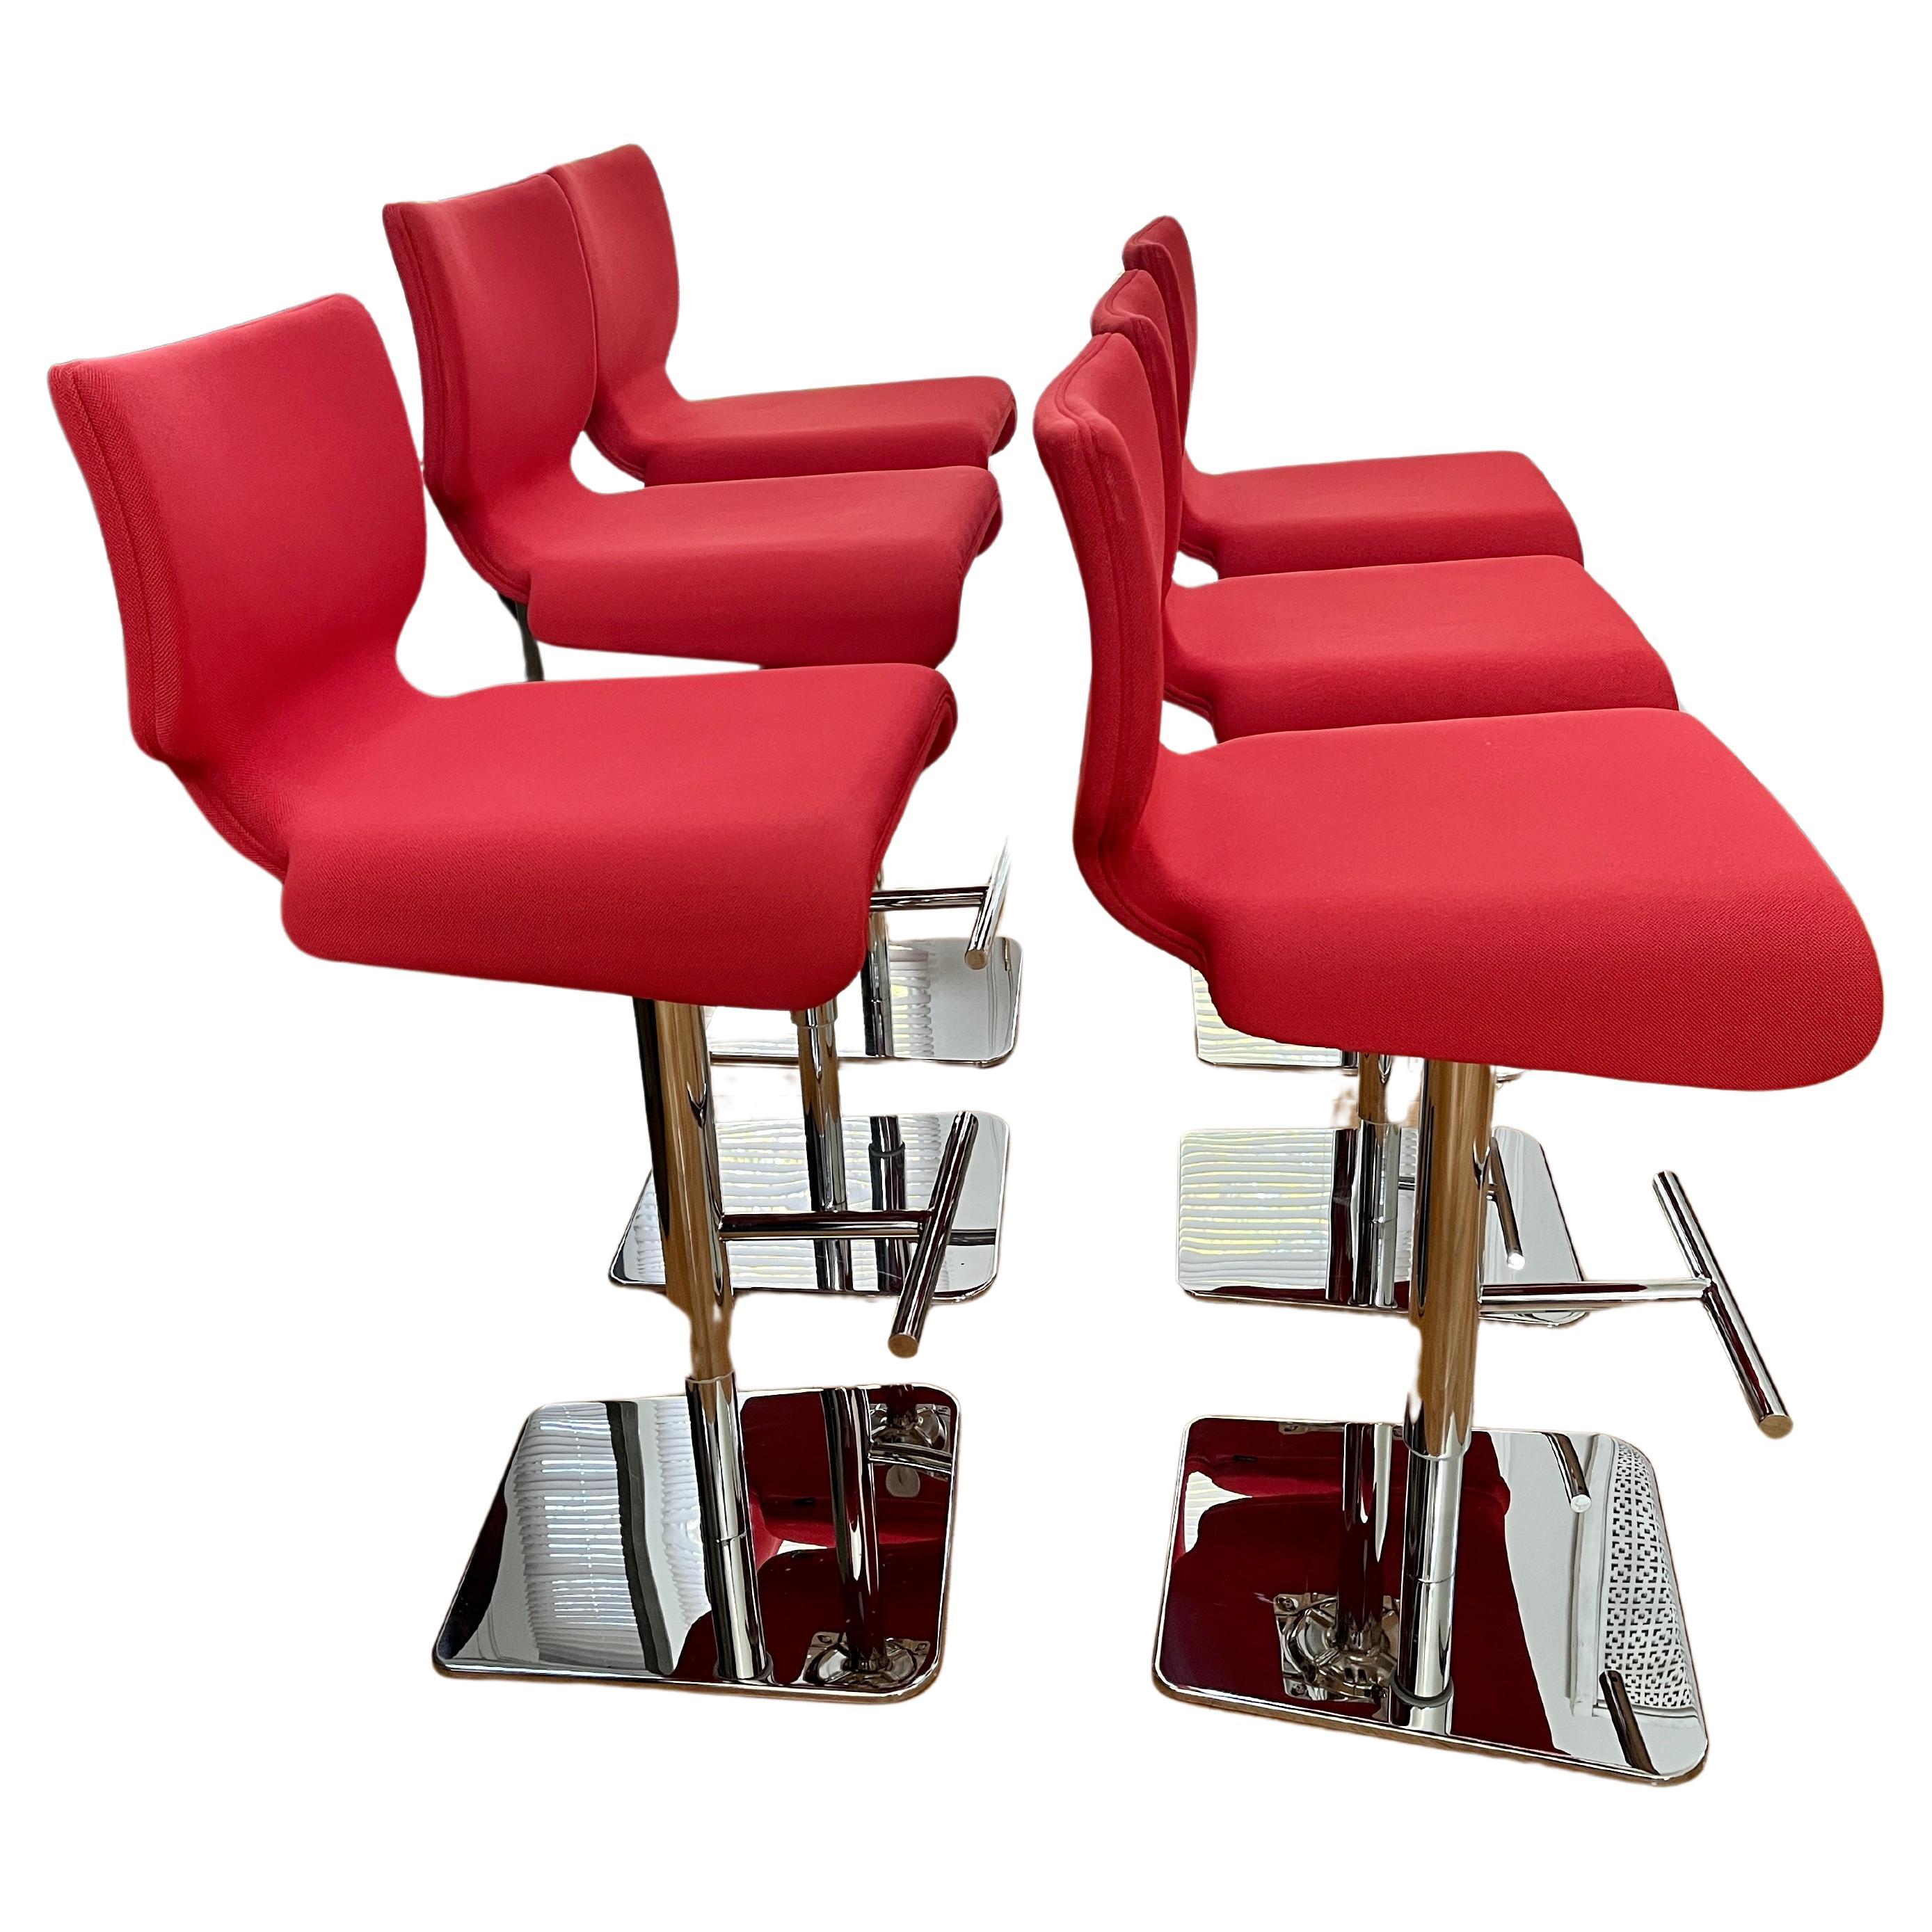 Upholstery Roche Bobois Chabada Stool, Swivel, Footrest, Chrome Plated - 6 Available For Sale